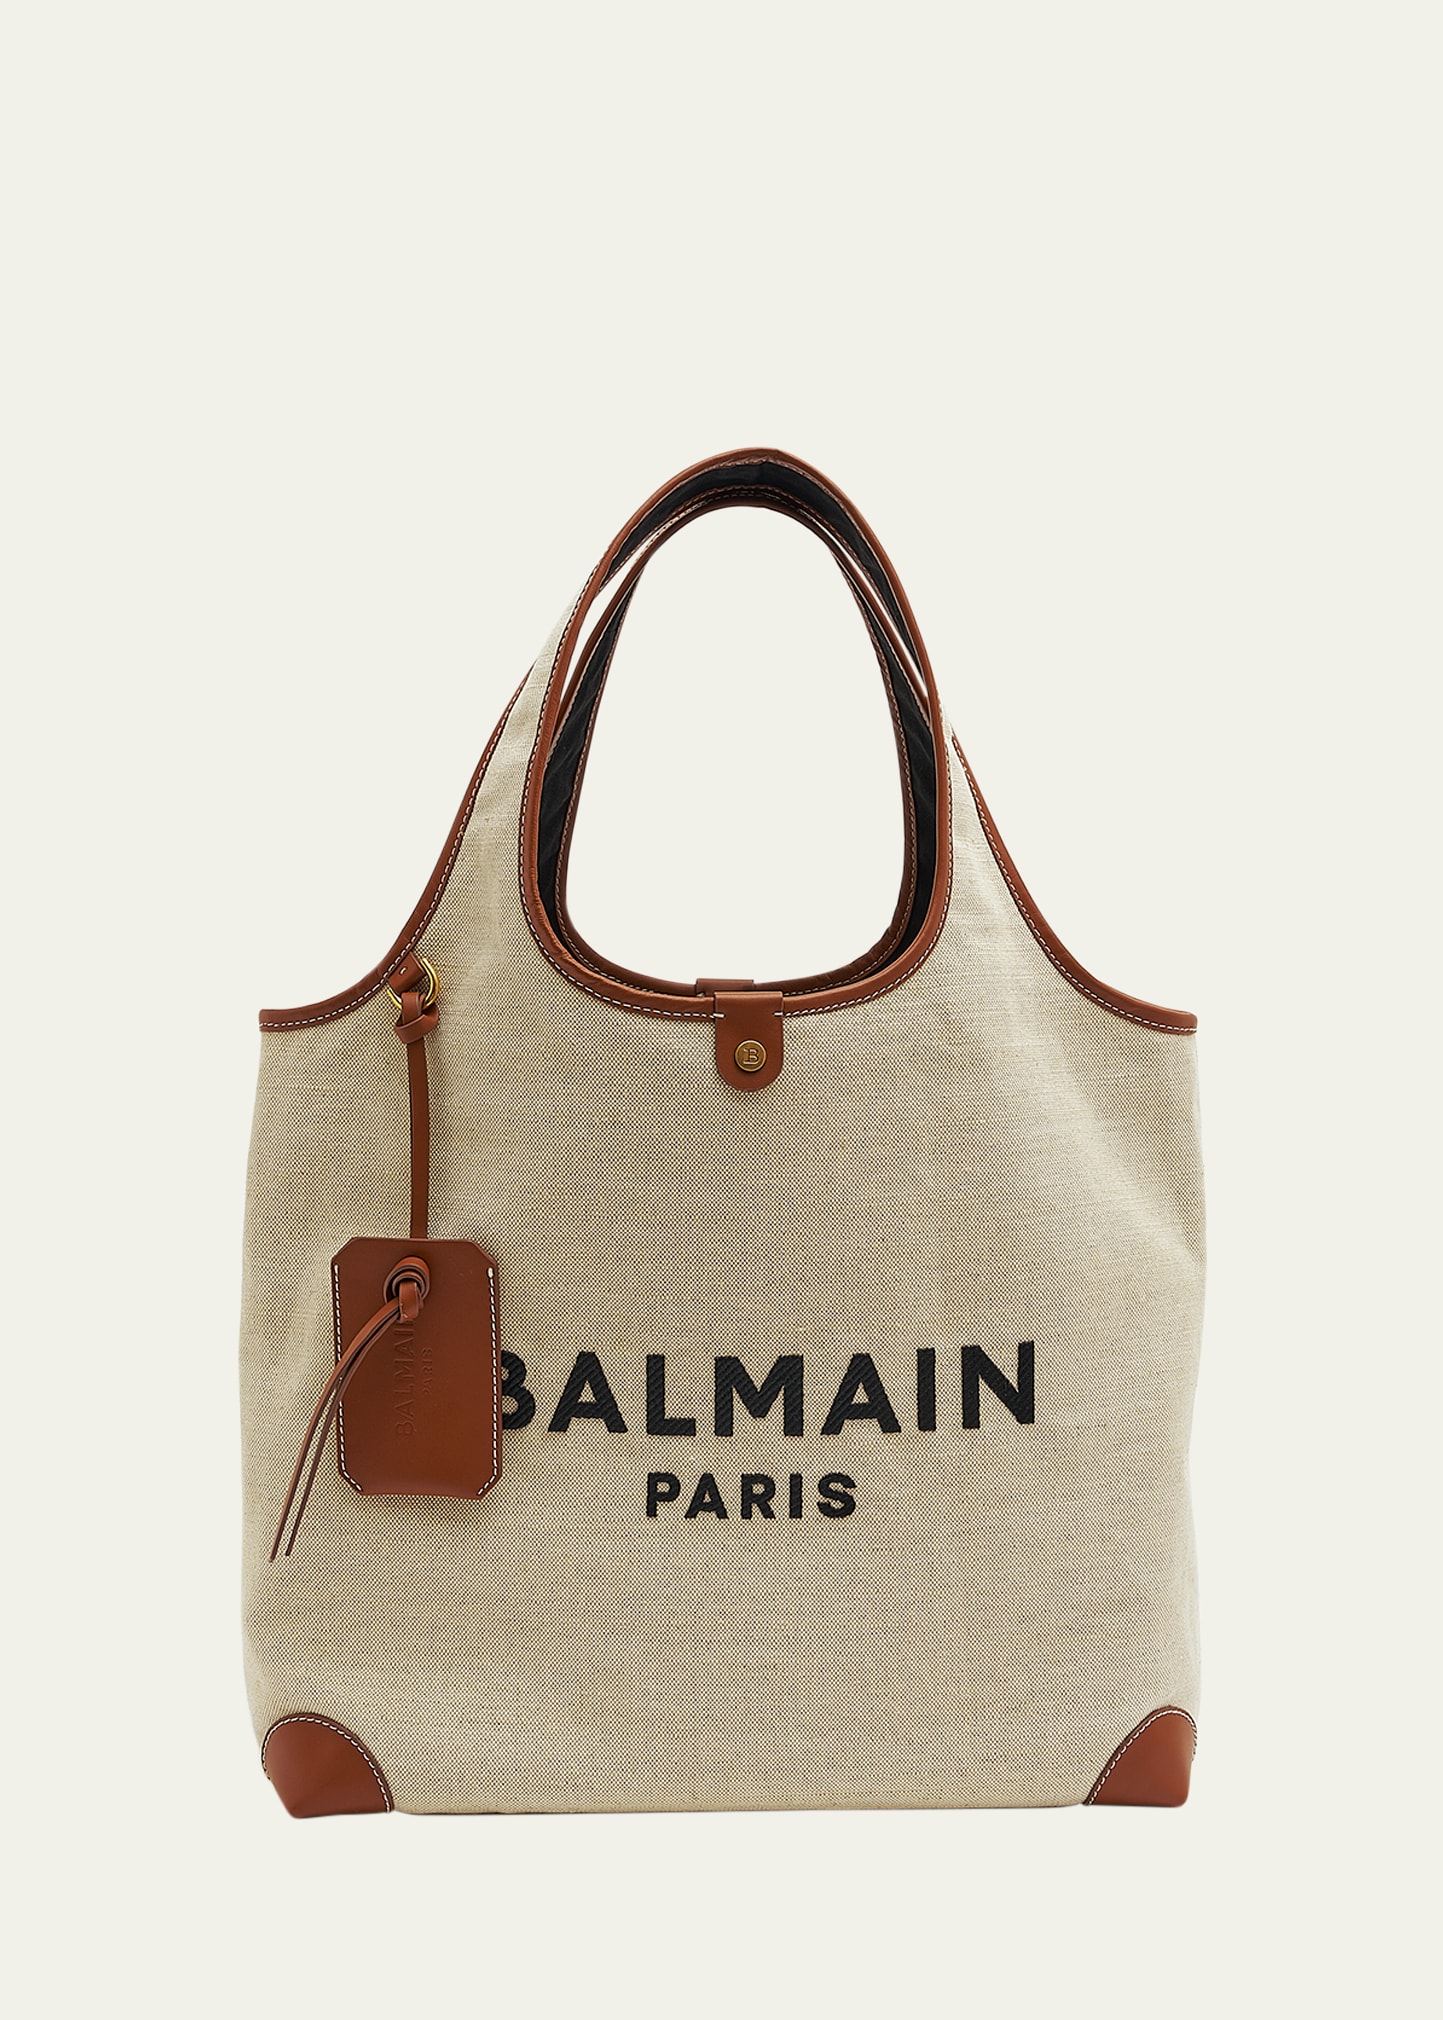 B Army Grocery Tote Bag in Canvas with Leather Handle